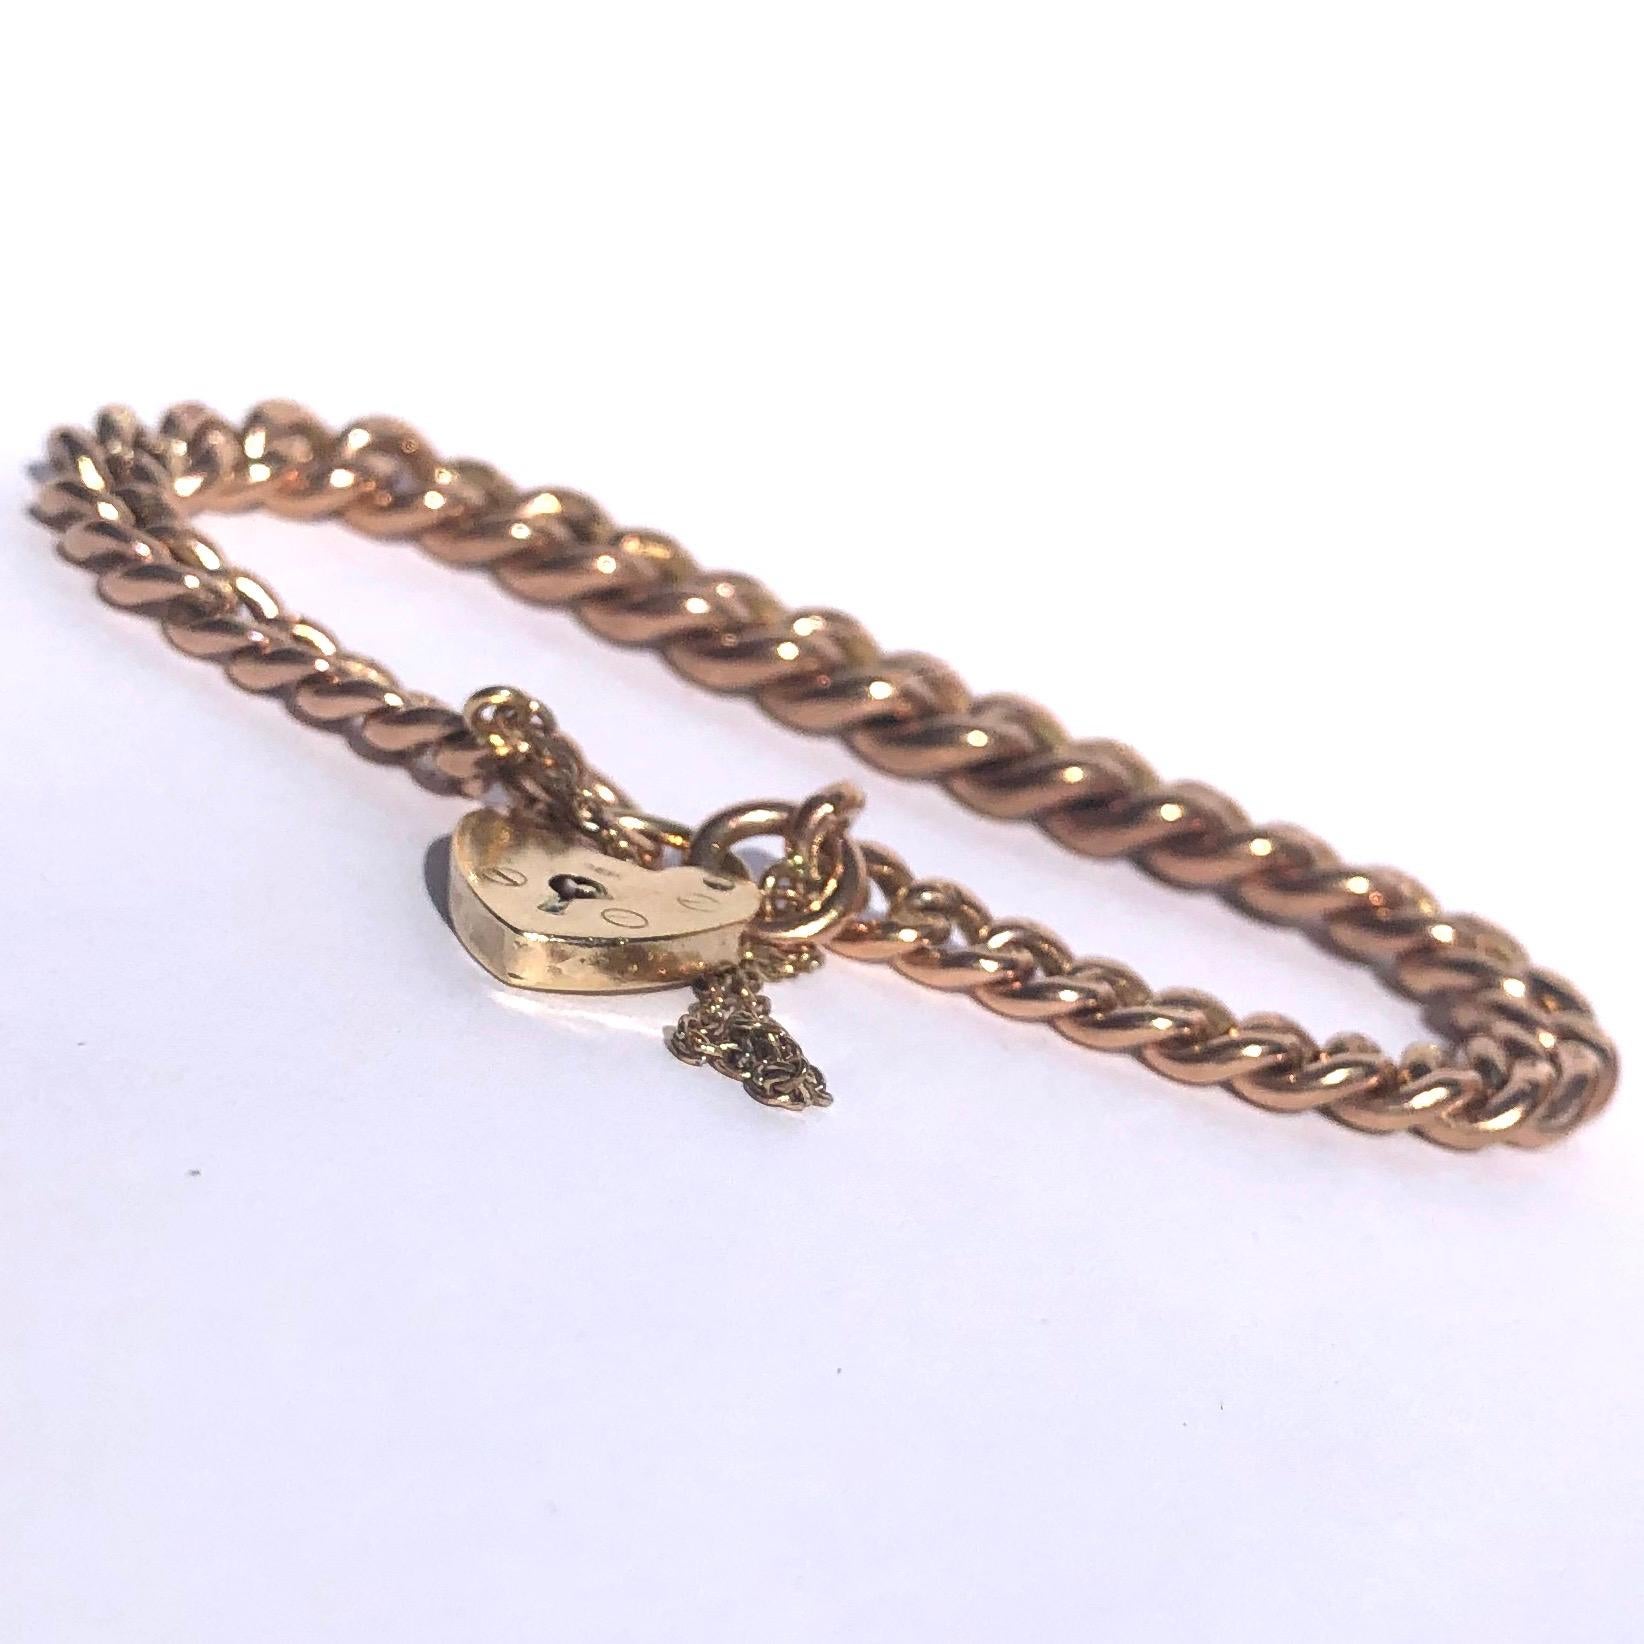 This is a classic curb bracelet modelled in 9ct rose gold and has a yellow gold heart padlock as the method of fastening. Every link in this bracelet is marked as 9ct gold. 

Length: 17.5cm 
Chain Width: 6mm

Weight: 26.5g